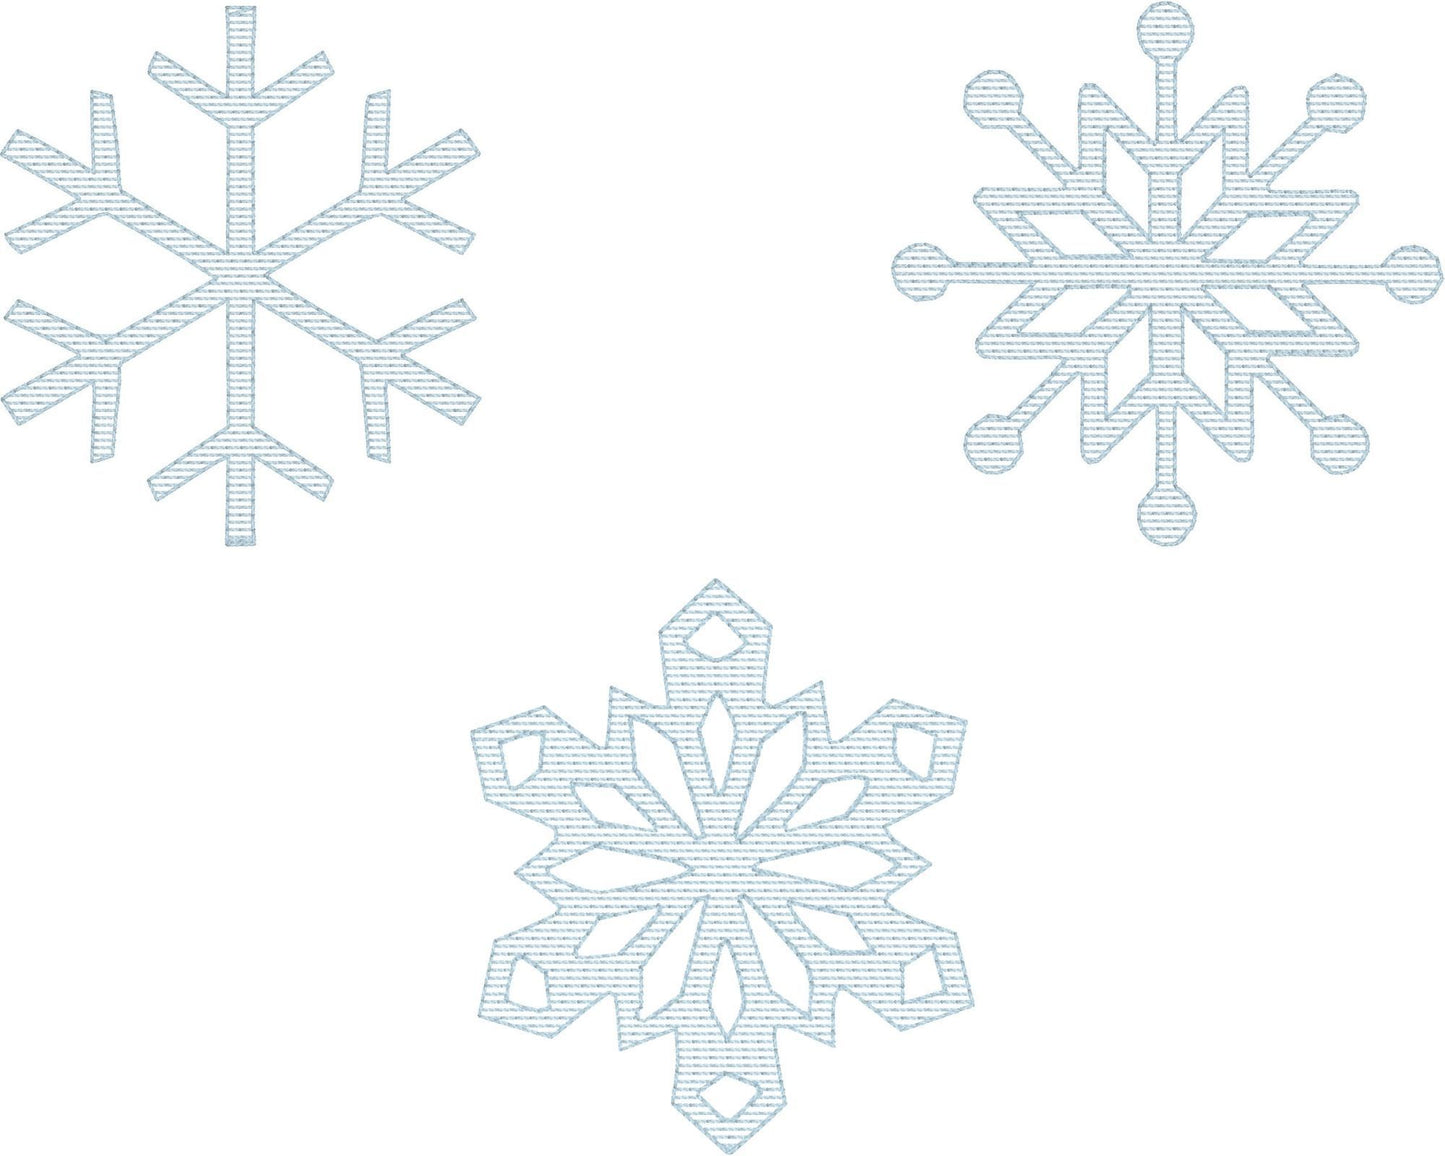 Snowflake Stripes Set of 3 - Machine Embroidery Quilting Design - 4x4 Hoop - Beachside Knits N Quilts